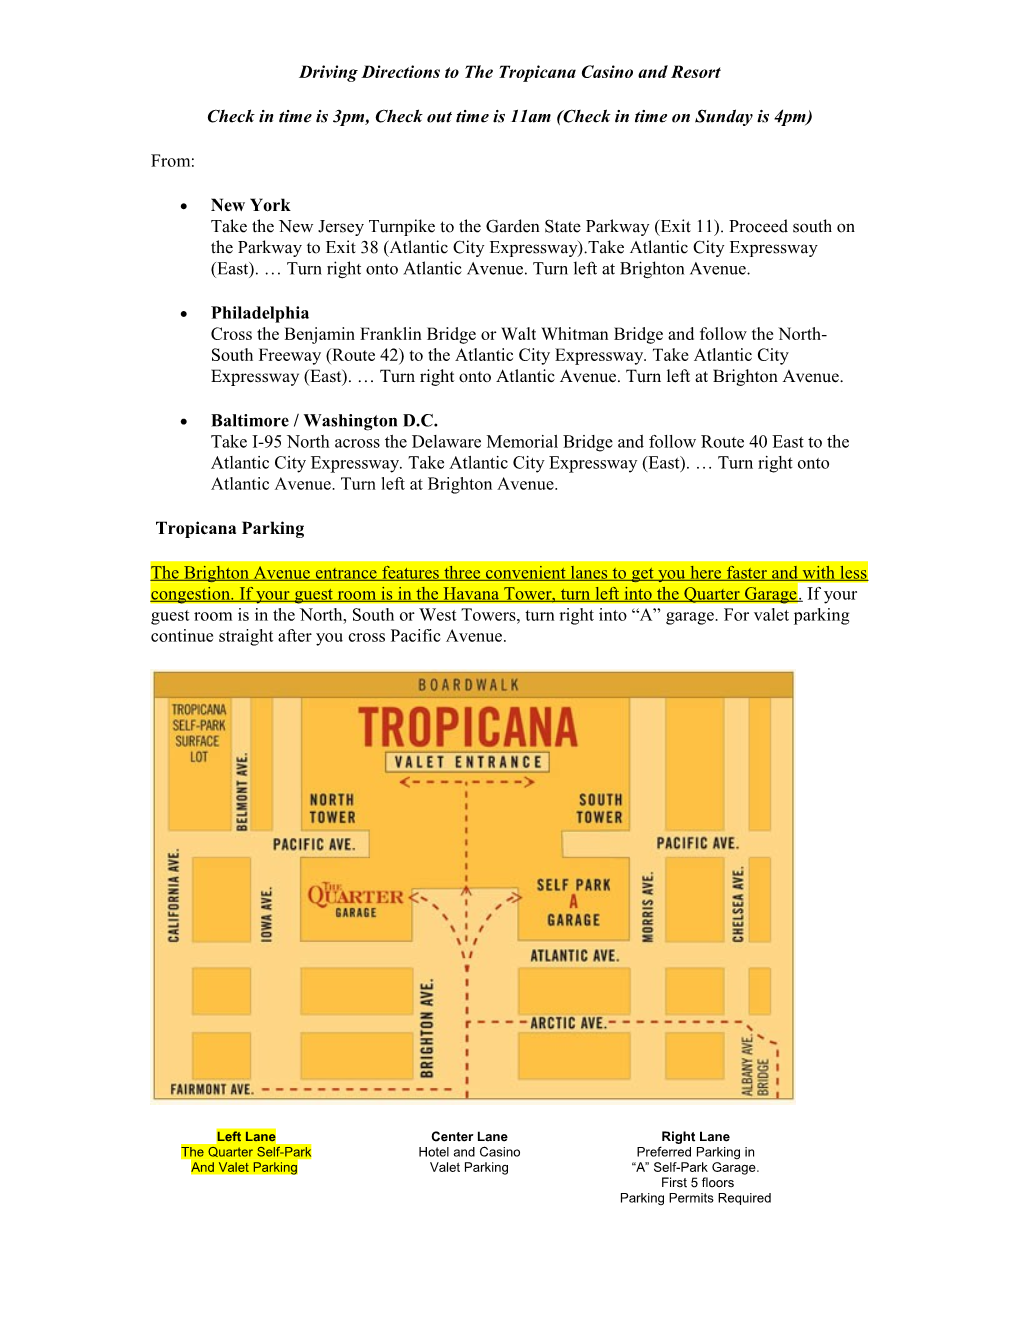 Driving Directions to the Tropicana Casino and Resort